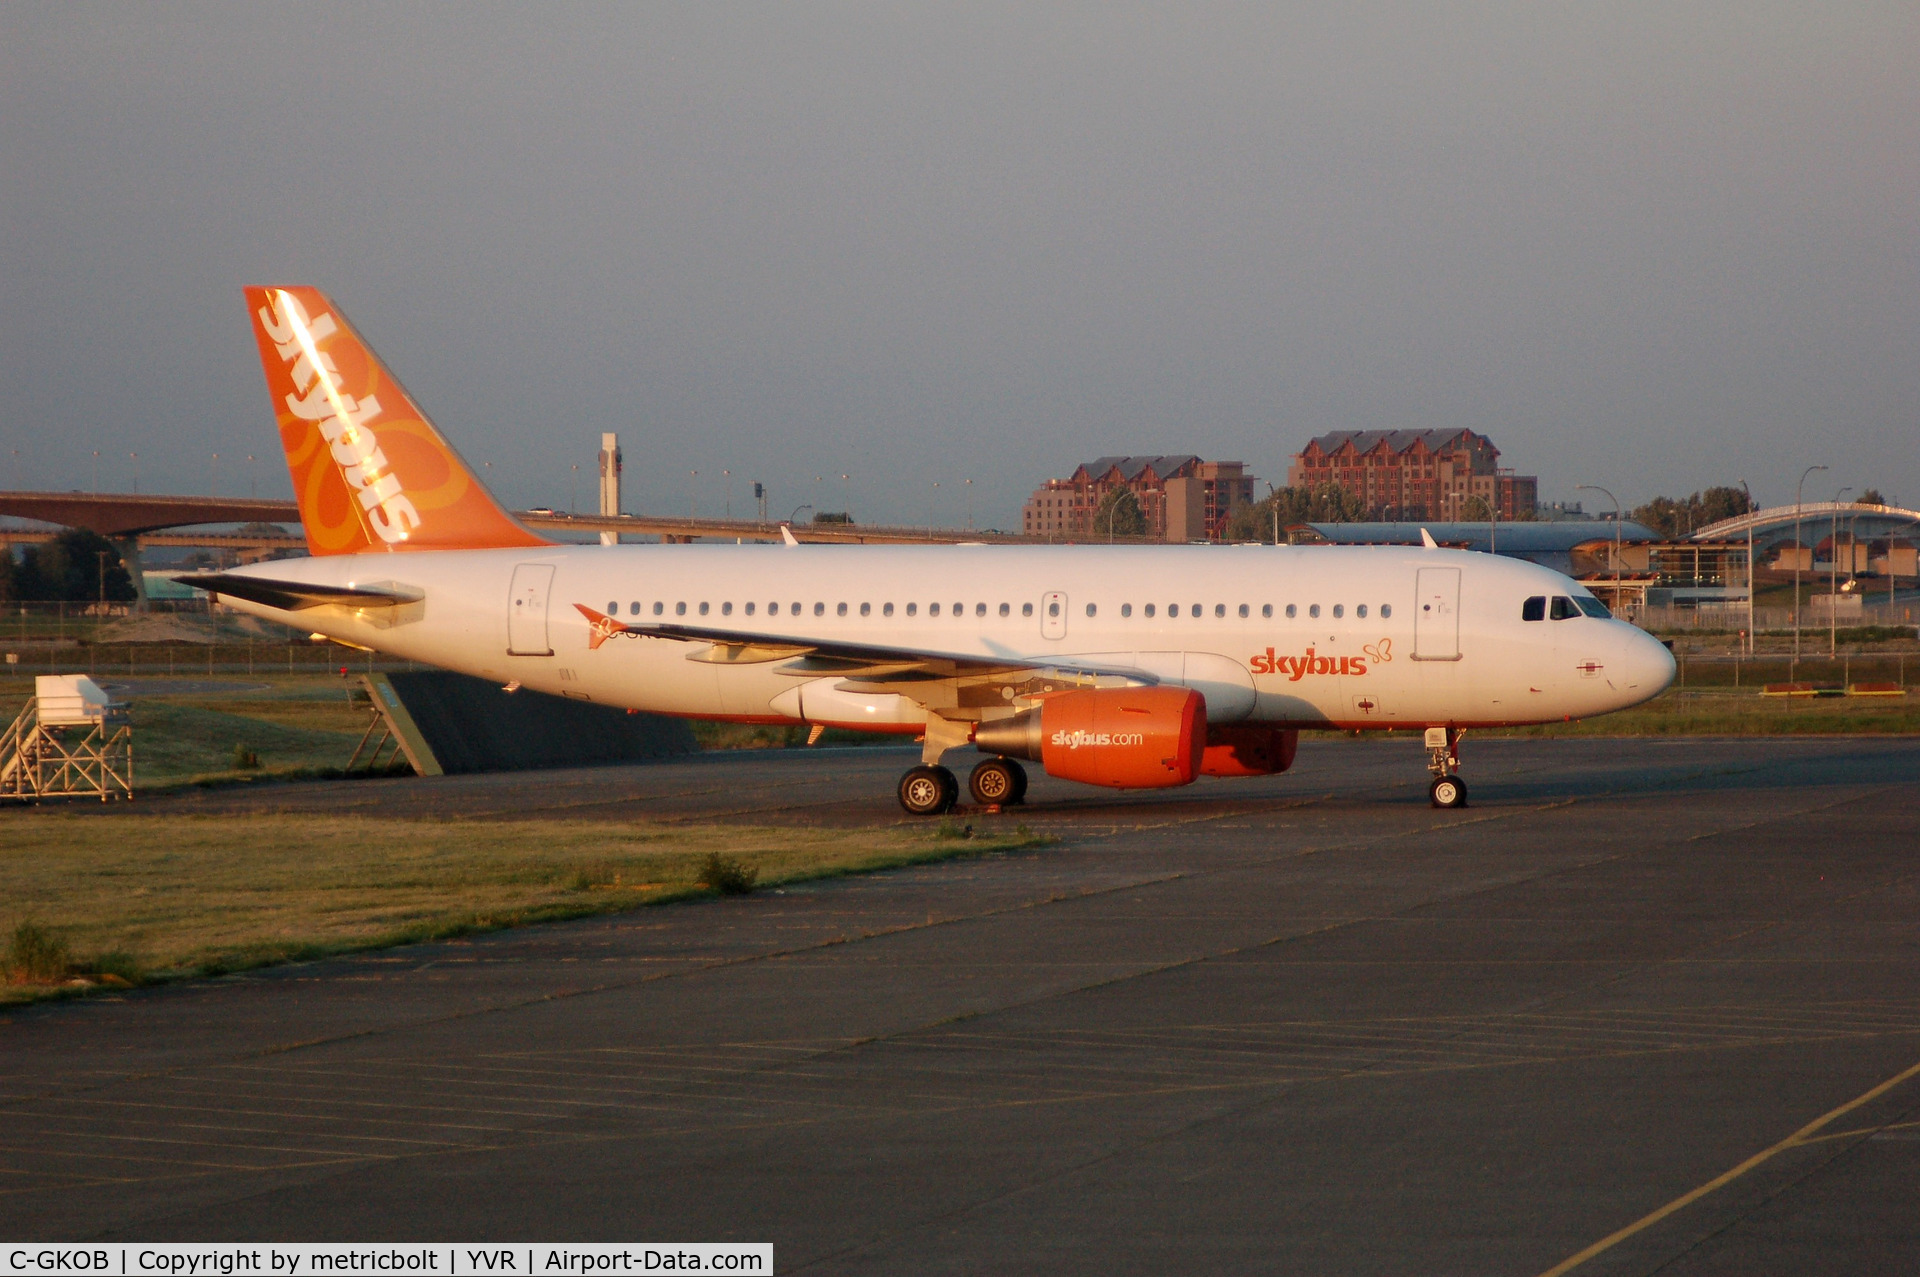 C-GKOB, 2002 Airbus A319-112 C/N 1853, sunset at YVR